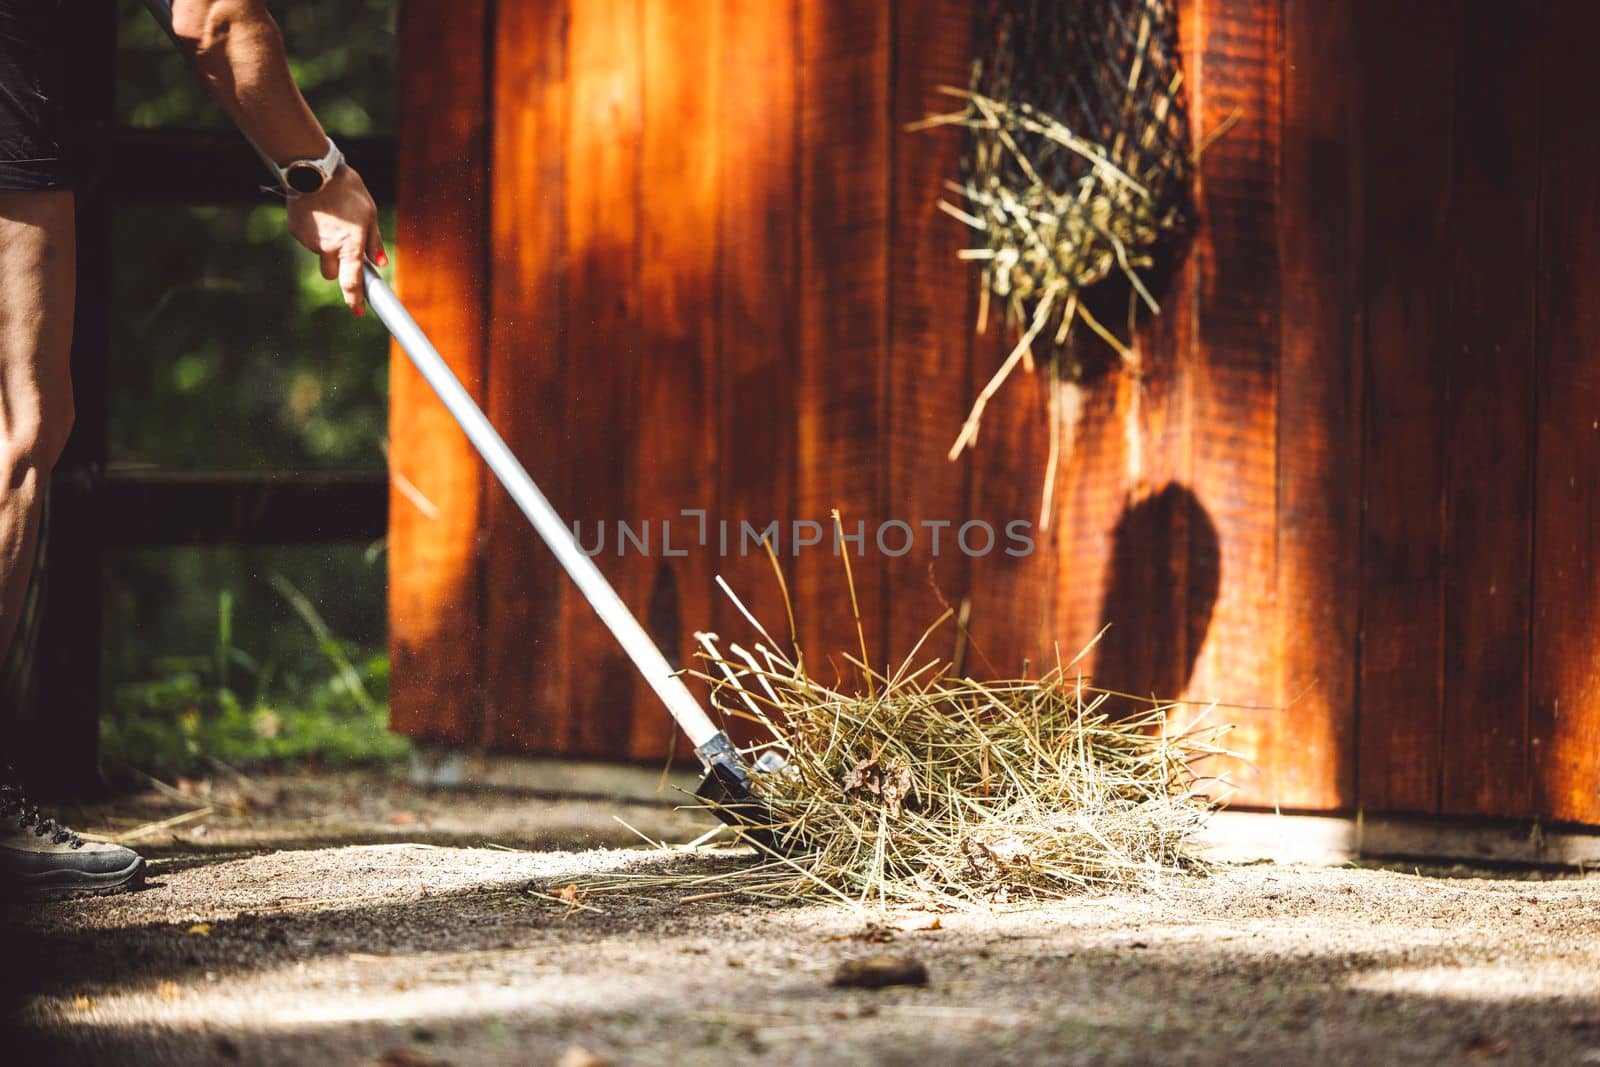 Unrecognizable woman cleaning the stables, putting some fresh hay in the corner for the horses to eat.